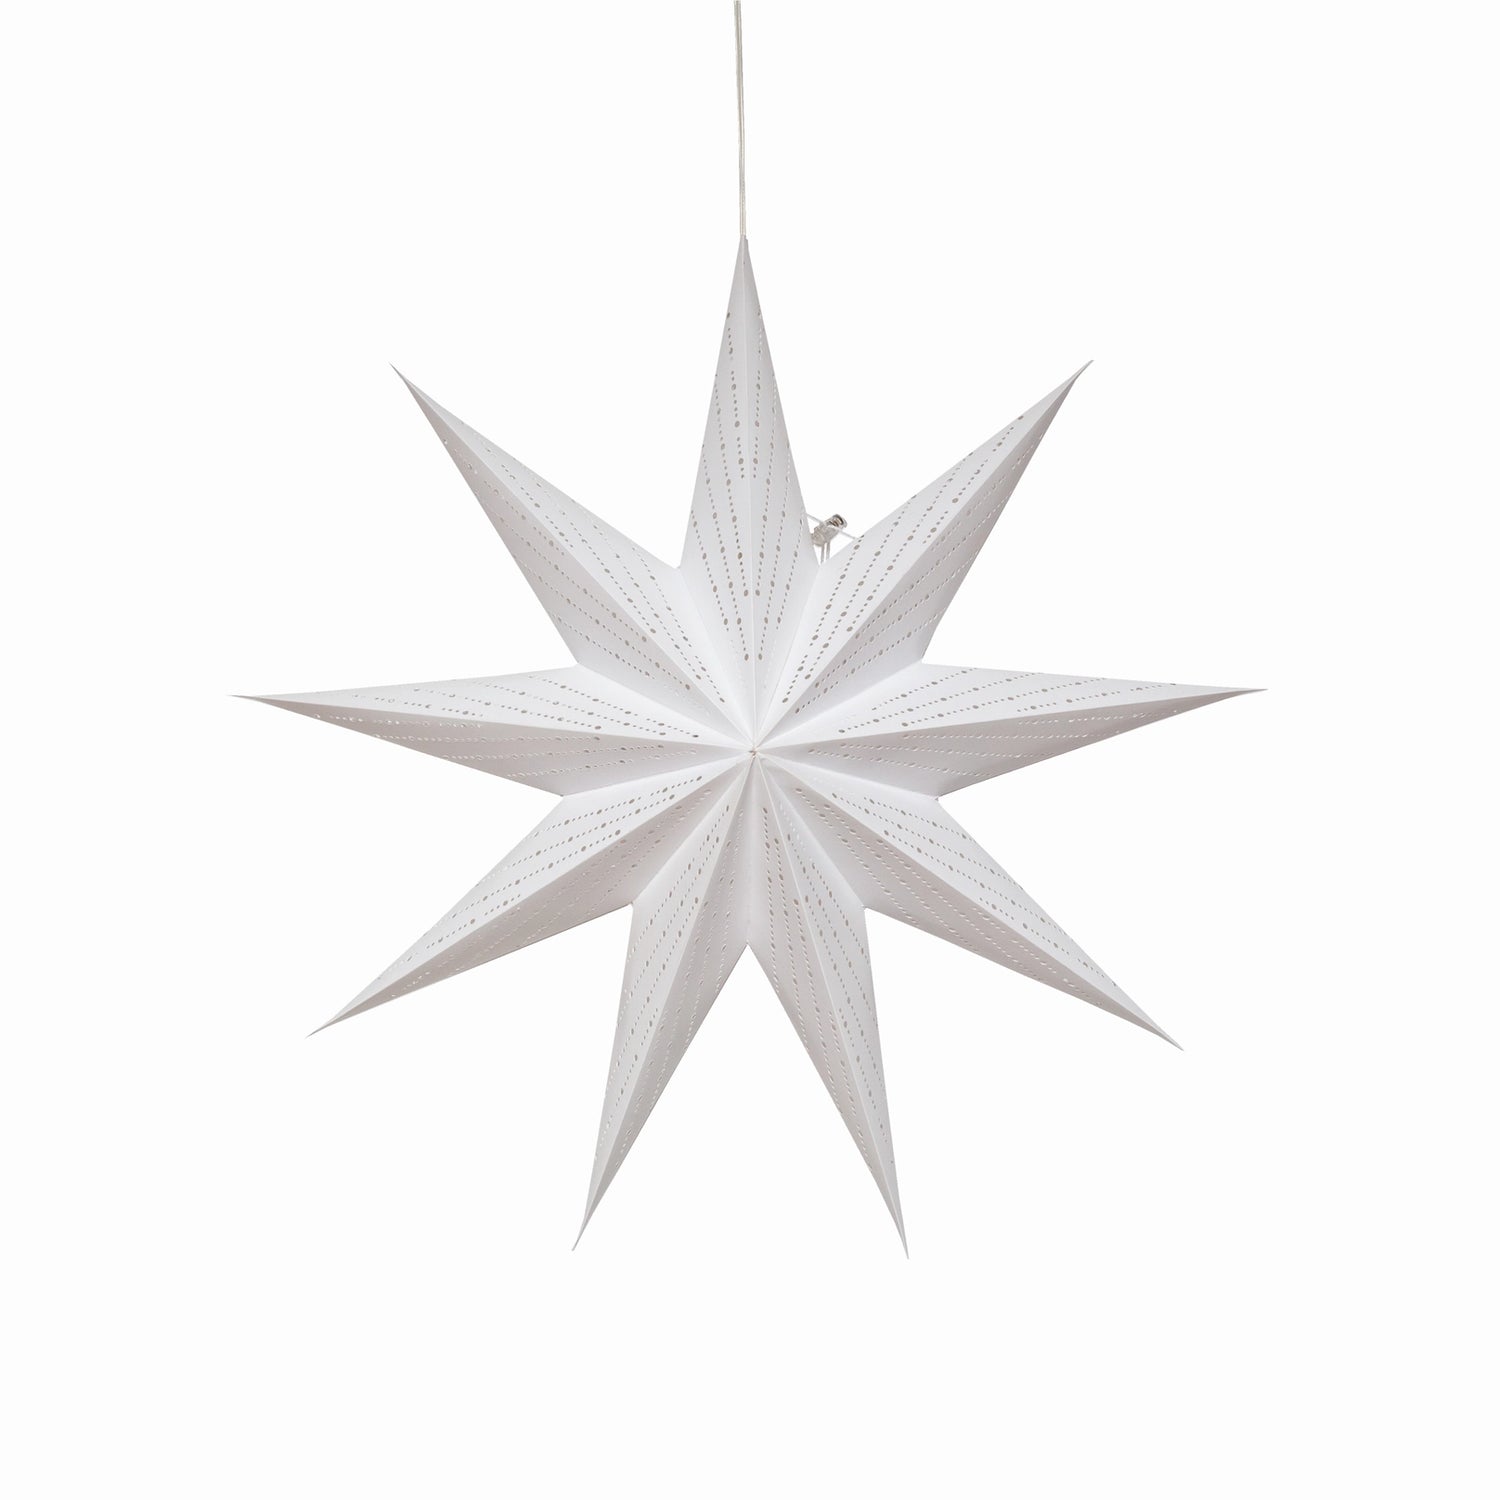 Dottie ~ 9 Pointer, 18inch, White, Paper Star Lantern Light- Light included - Moon Room Shop and Wellness